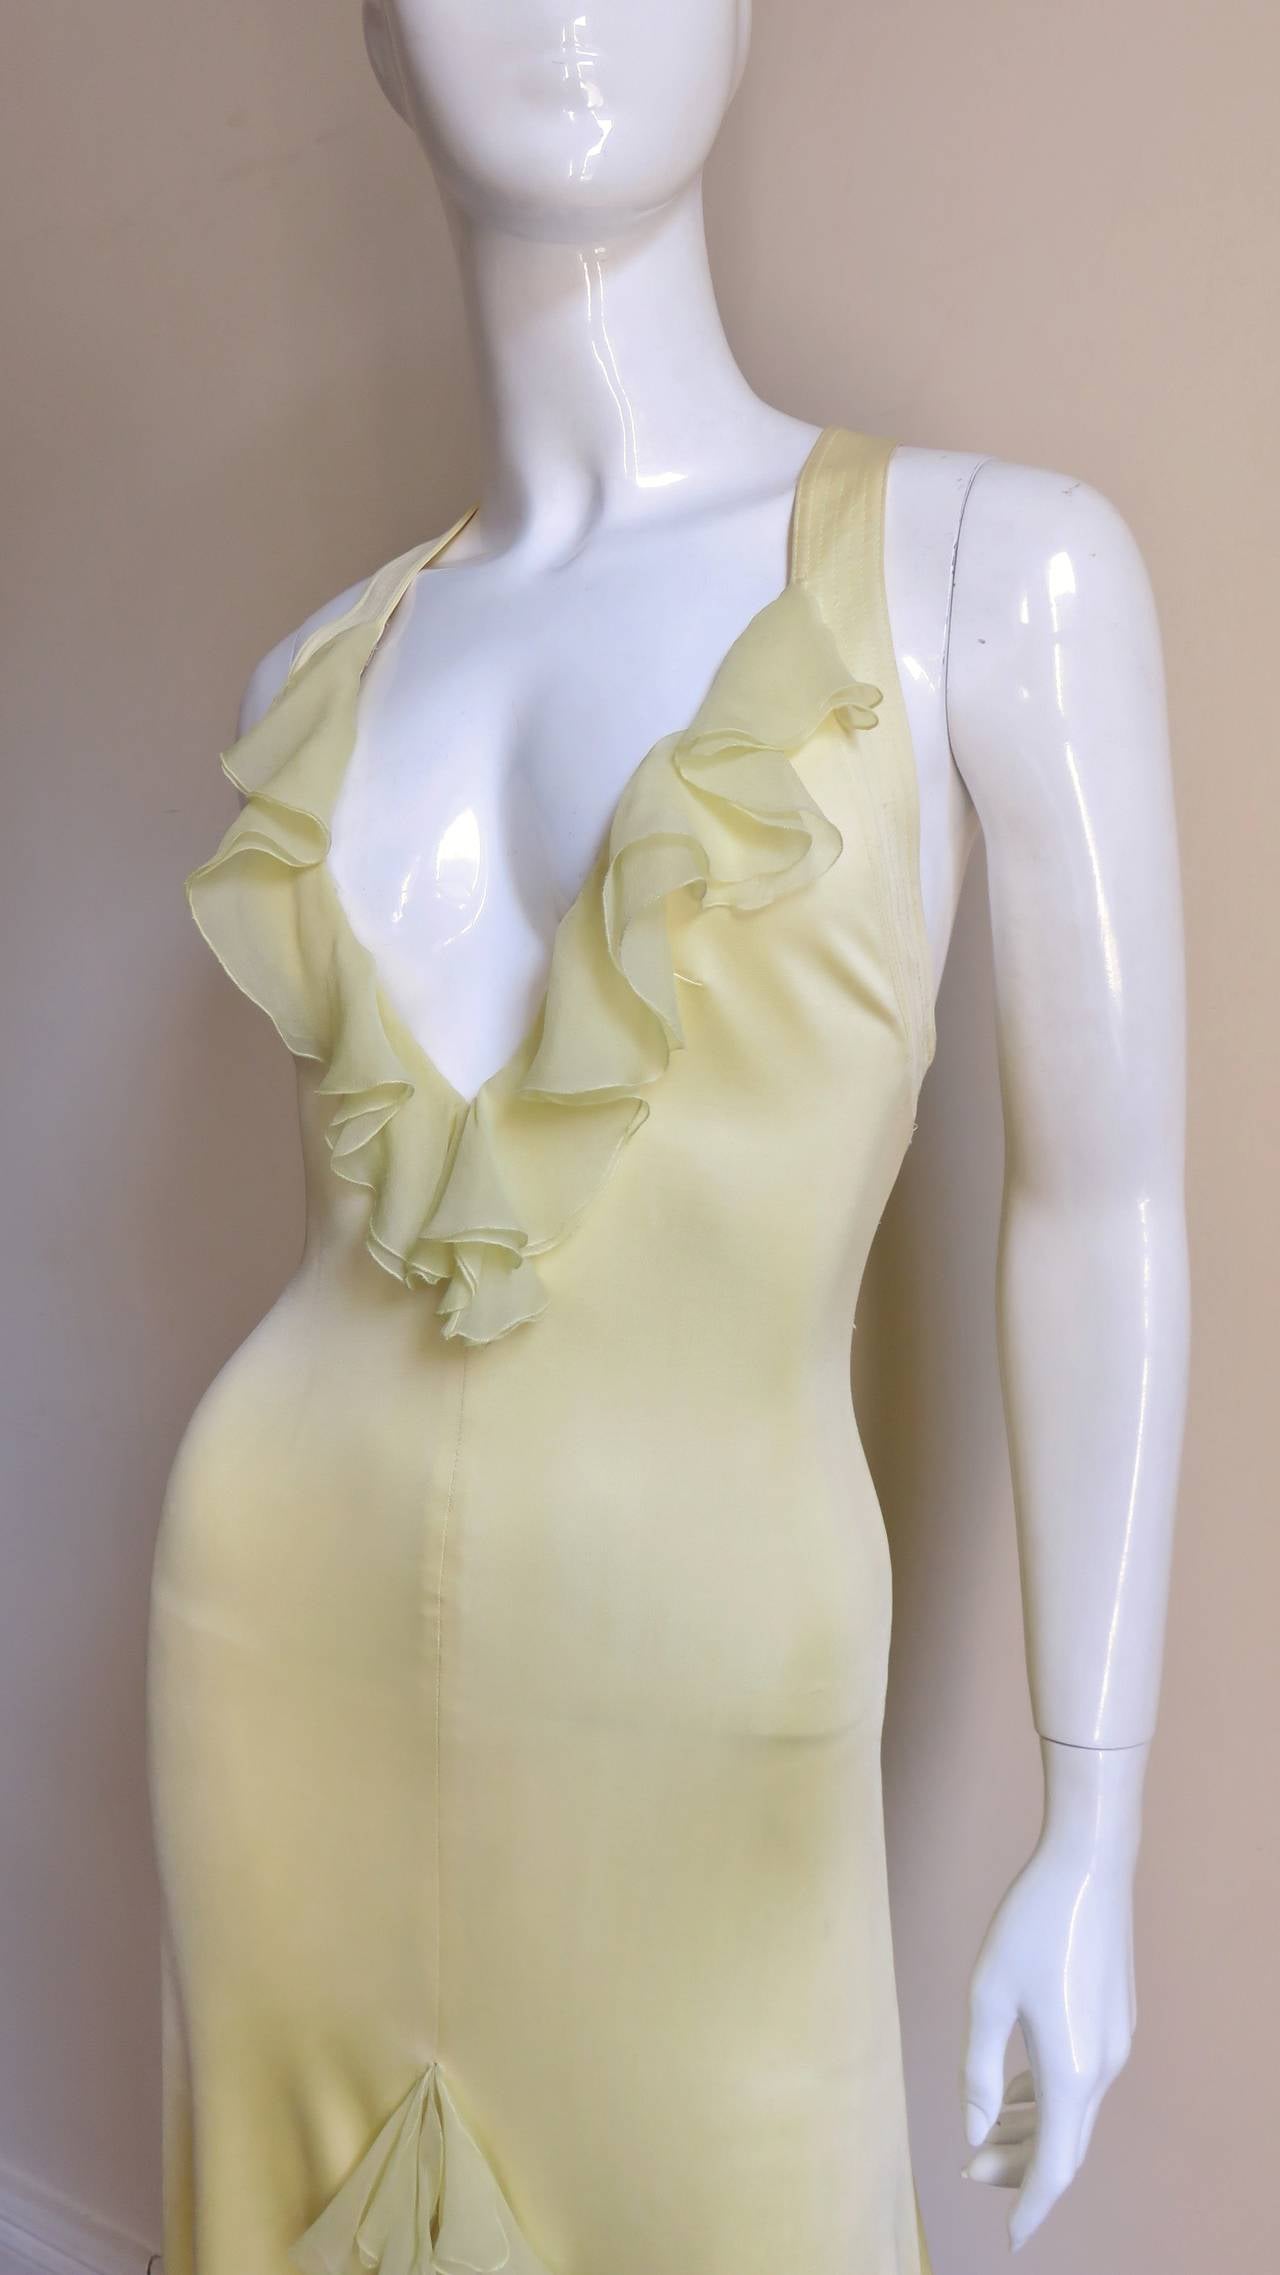 A gorgeous stretch silk dress in a lovely lemon shade from Versace.  It has a deep plunging chiffon ruffle neckline, is fitted through the body and has a center front chiffon ruffle slit at the hem.  The multi top stitched shoulder straps attach to